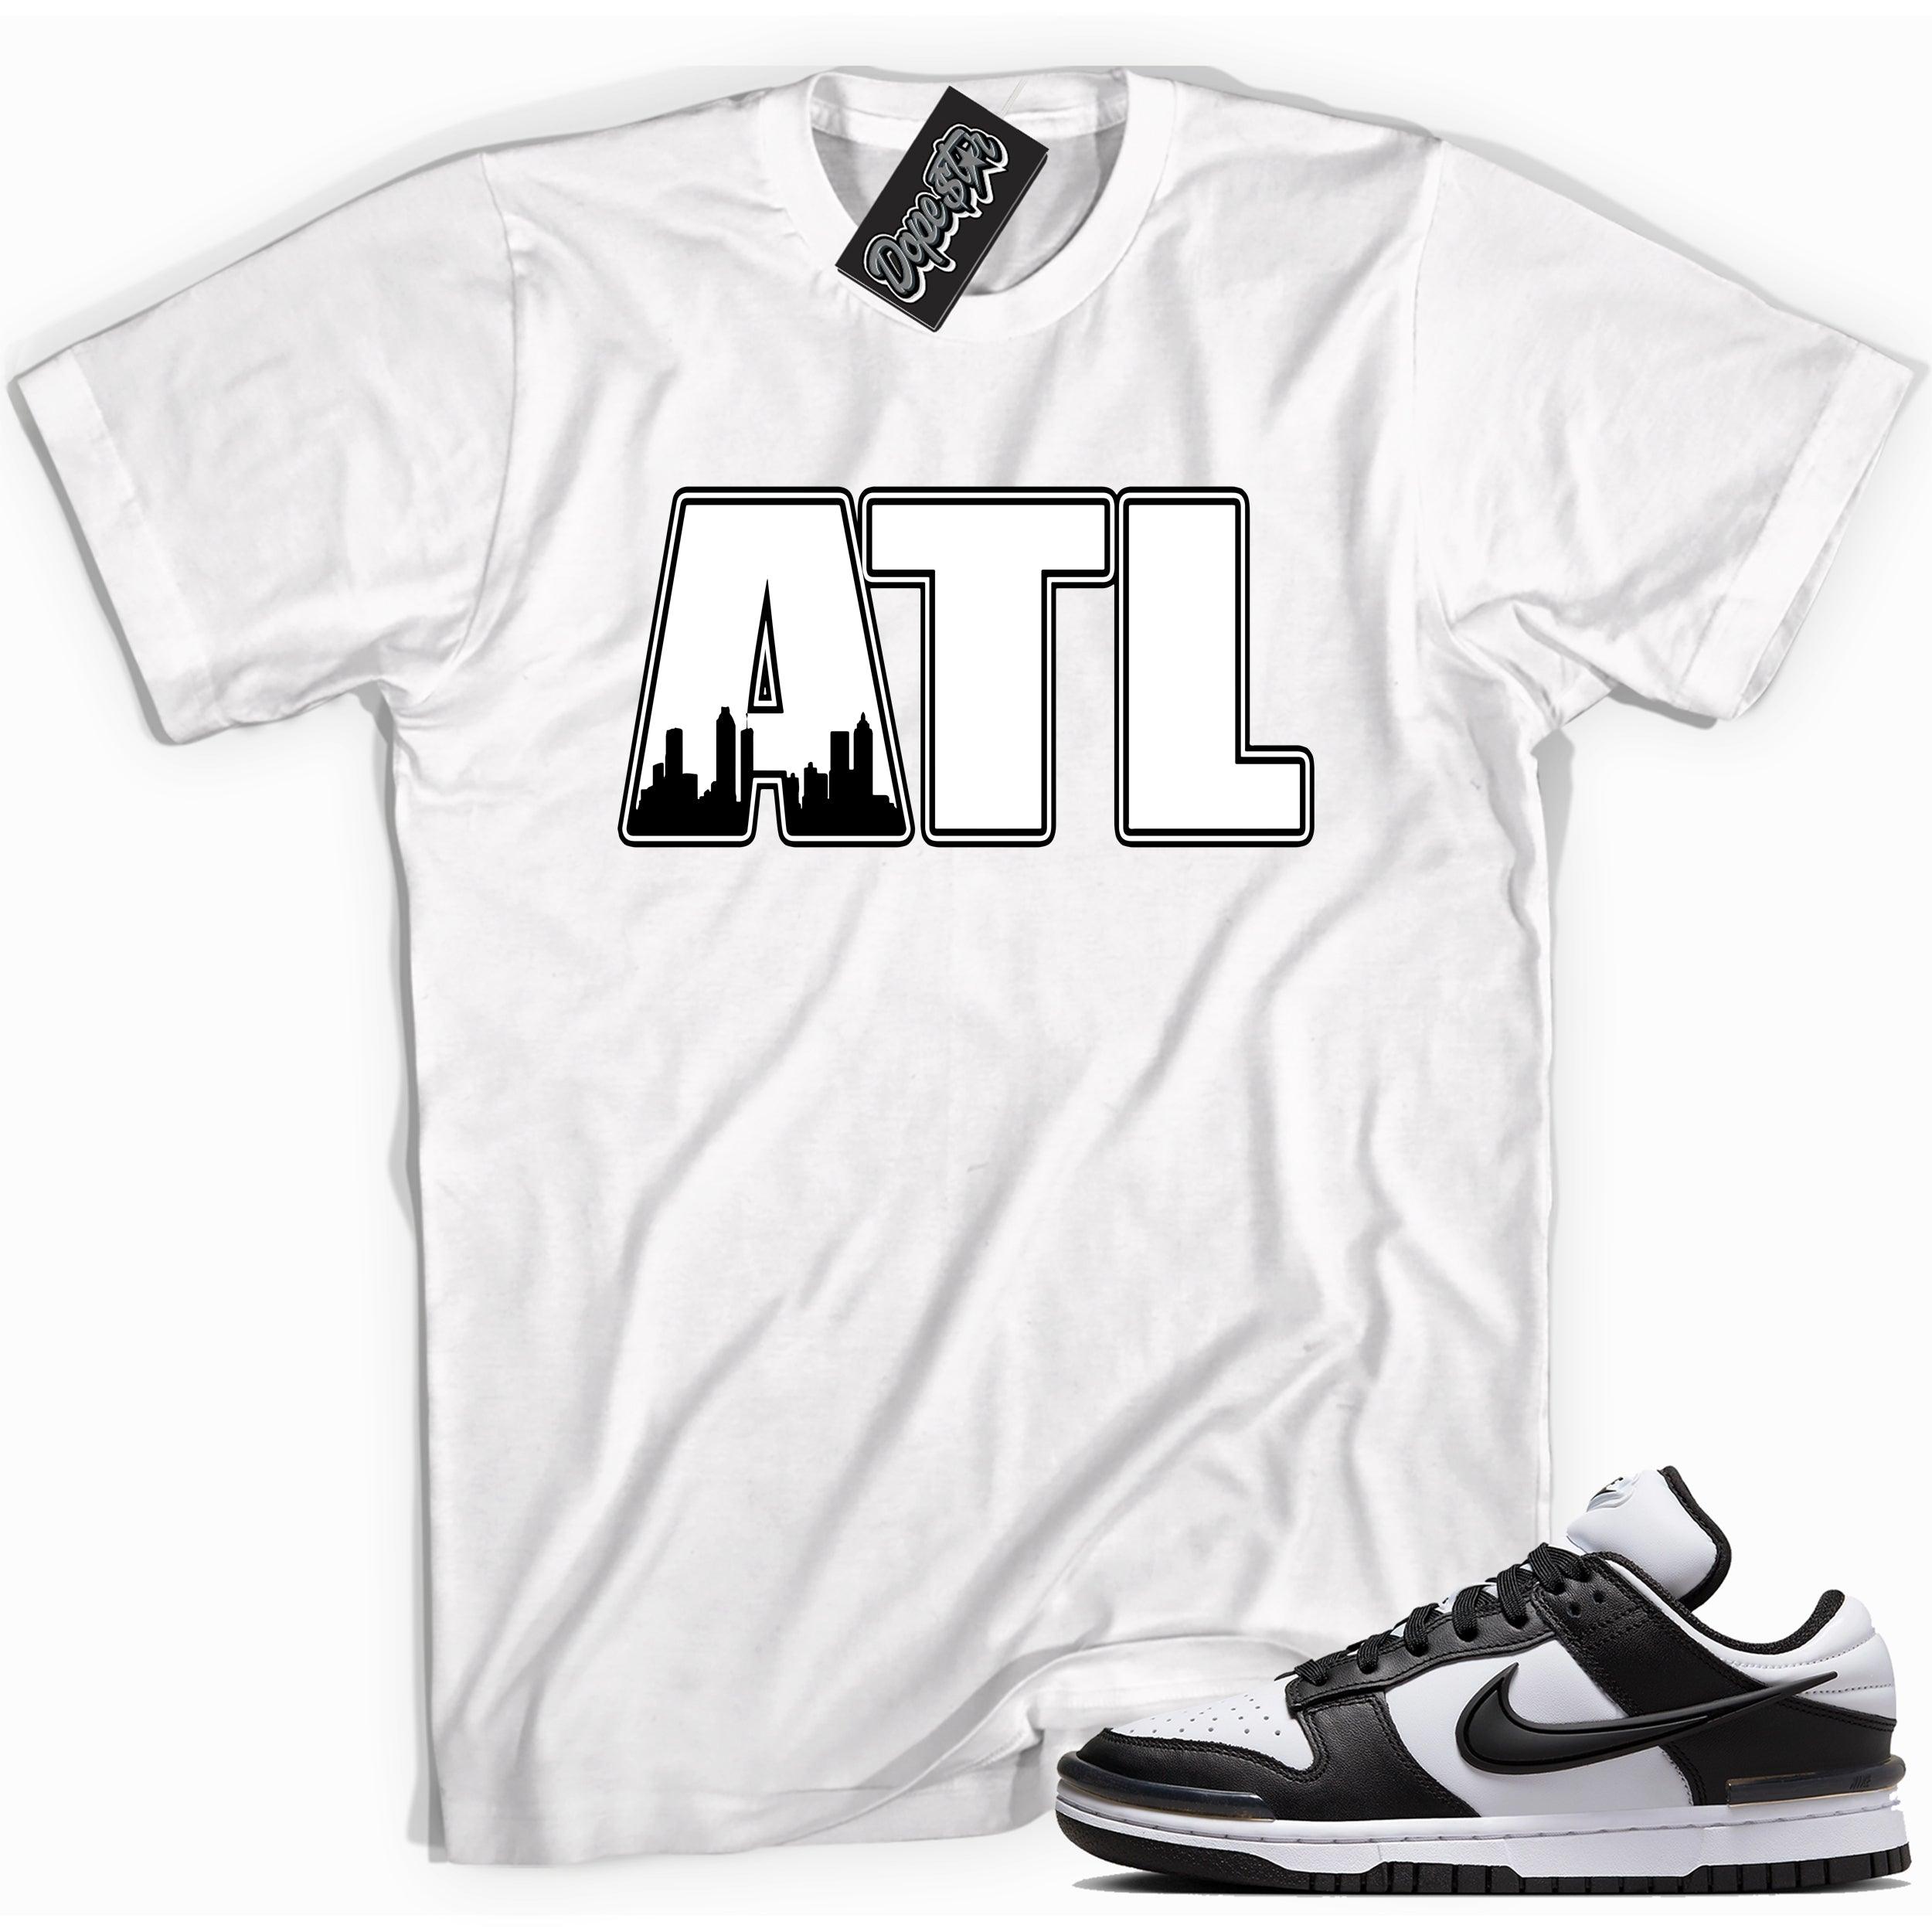 Cool white graphic tee with 'atl' print, that perfectly matches Nike Dunk Low Twist Panda sneakers.